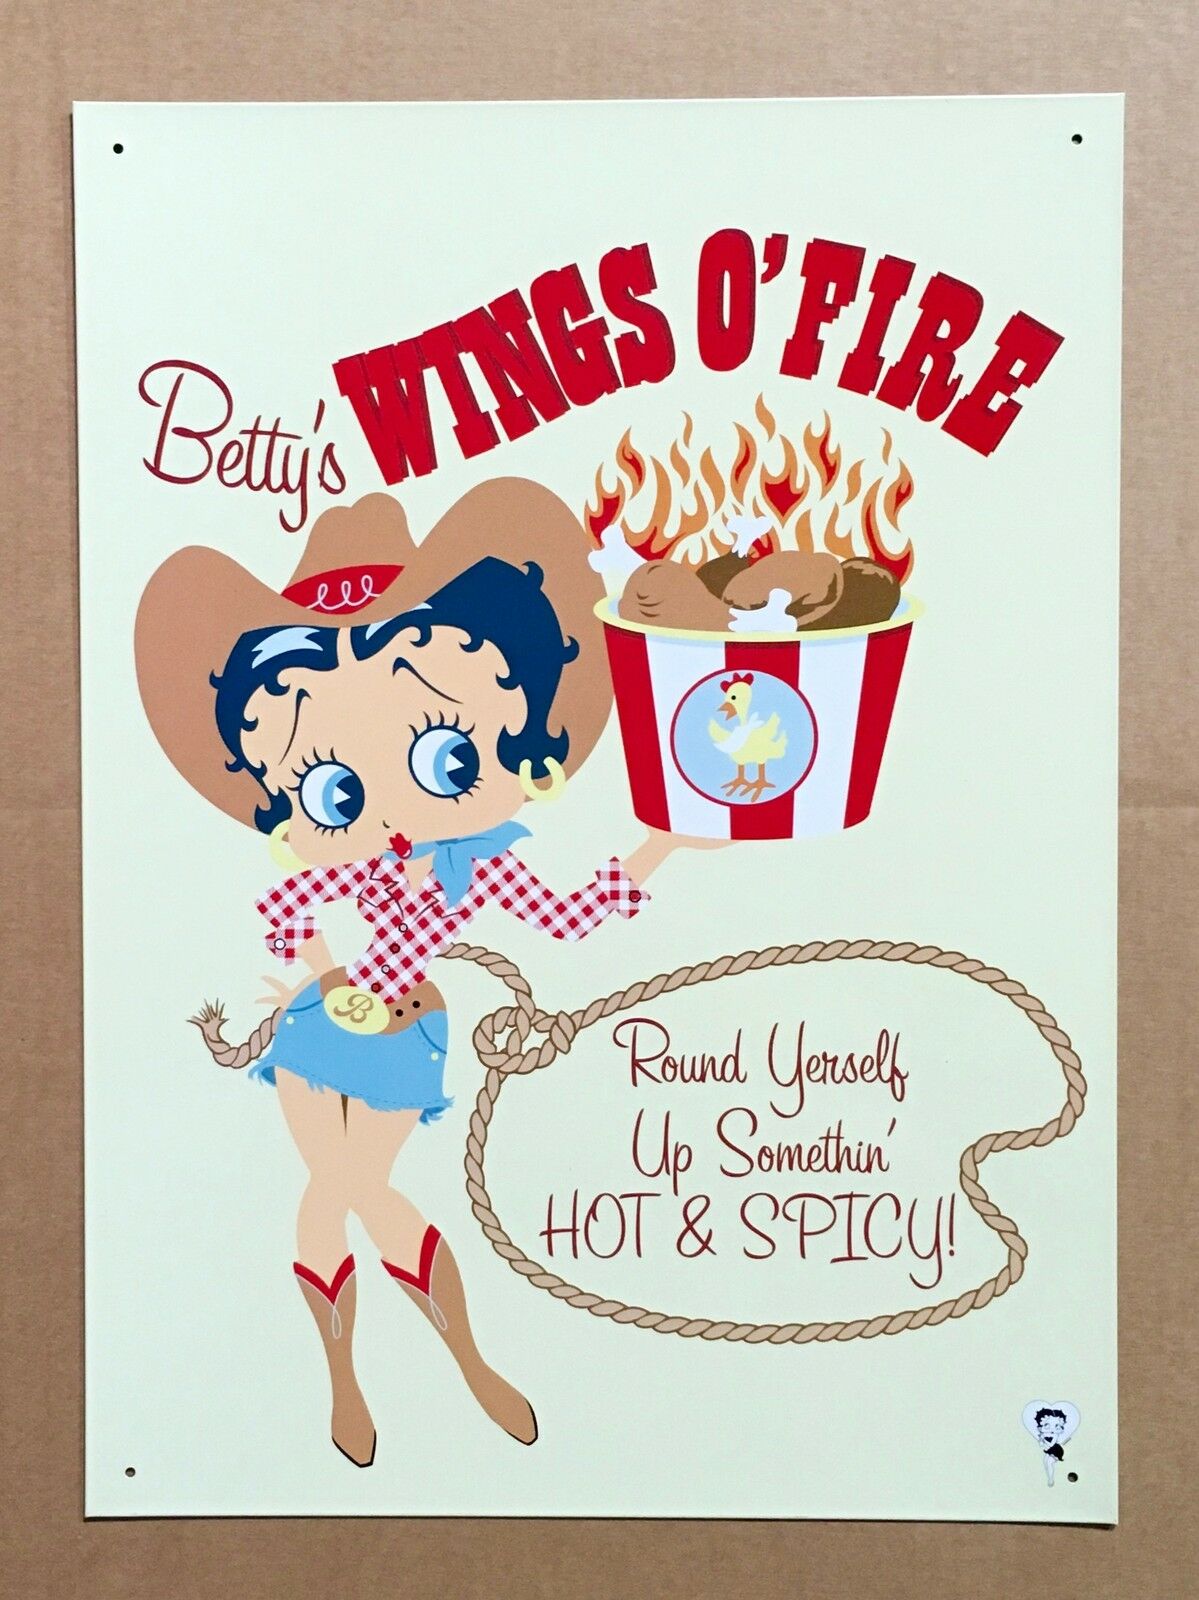 Betty Boop Metal Sign Great For Kitchen Novelty Item Wings O' Fire